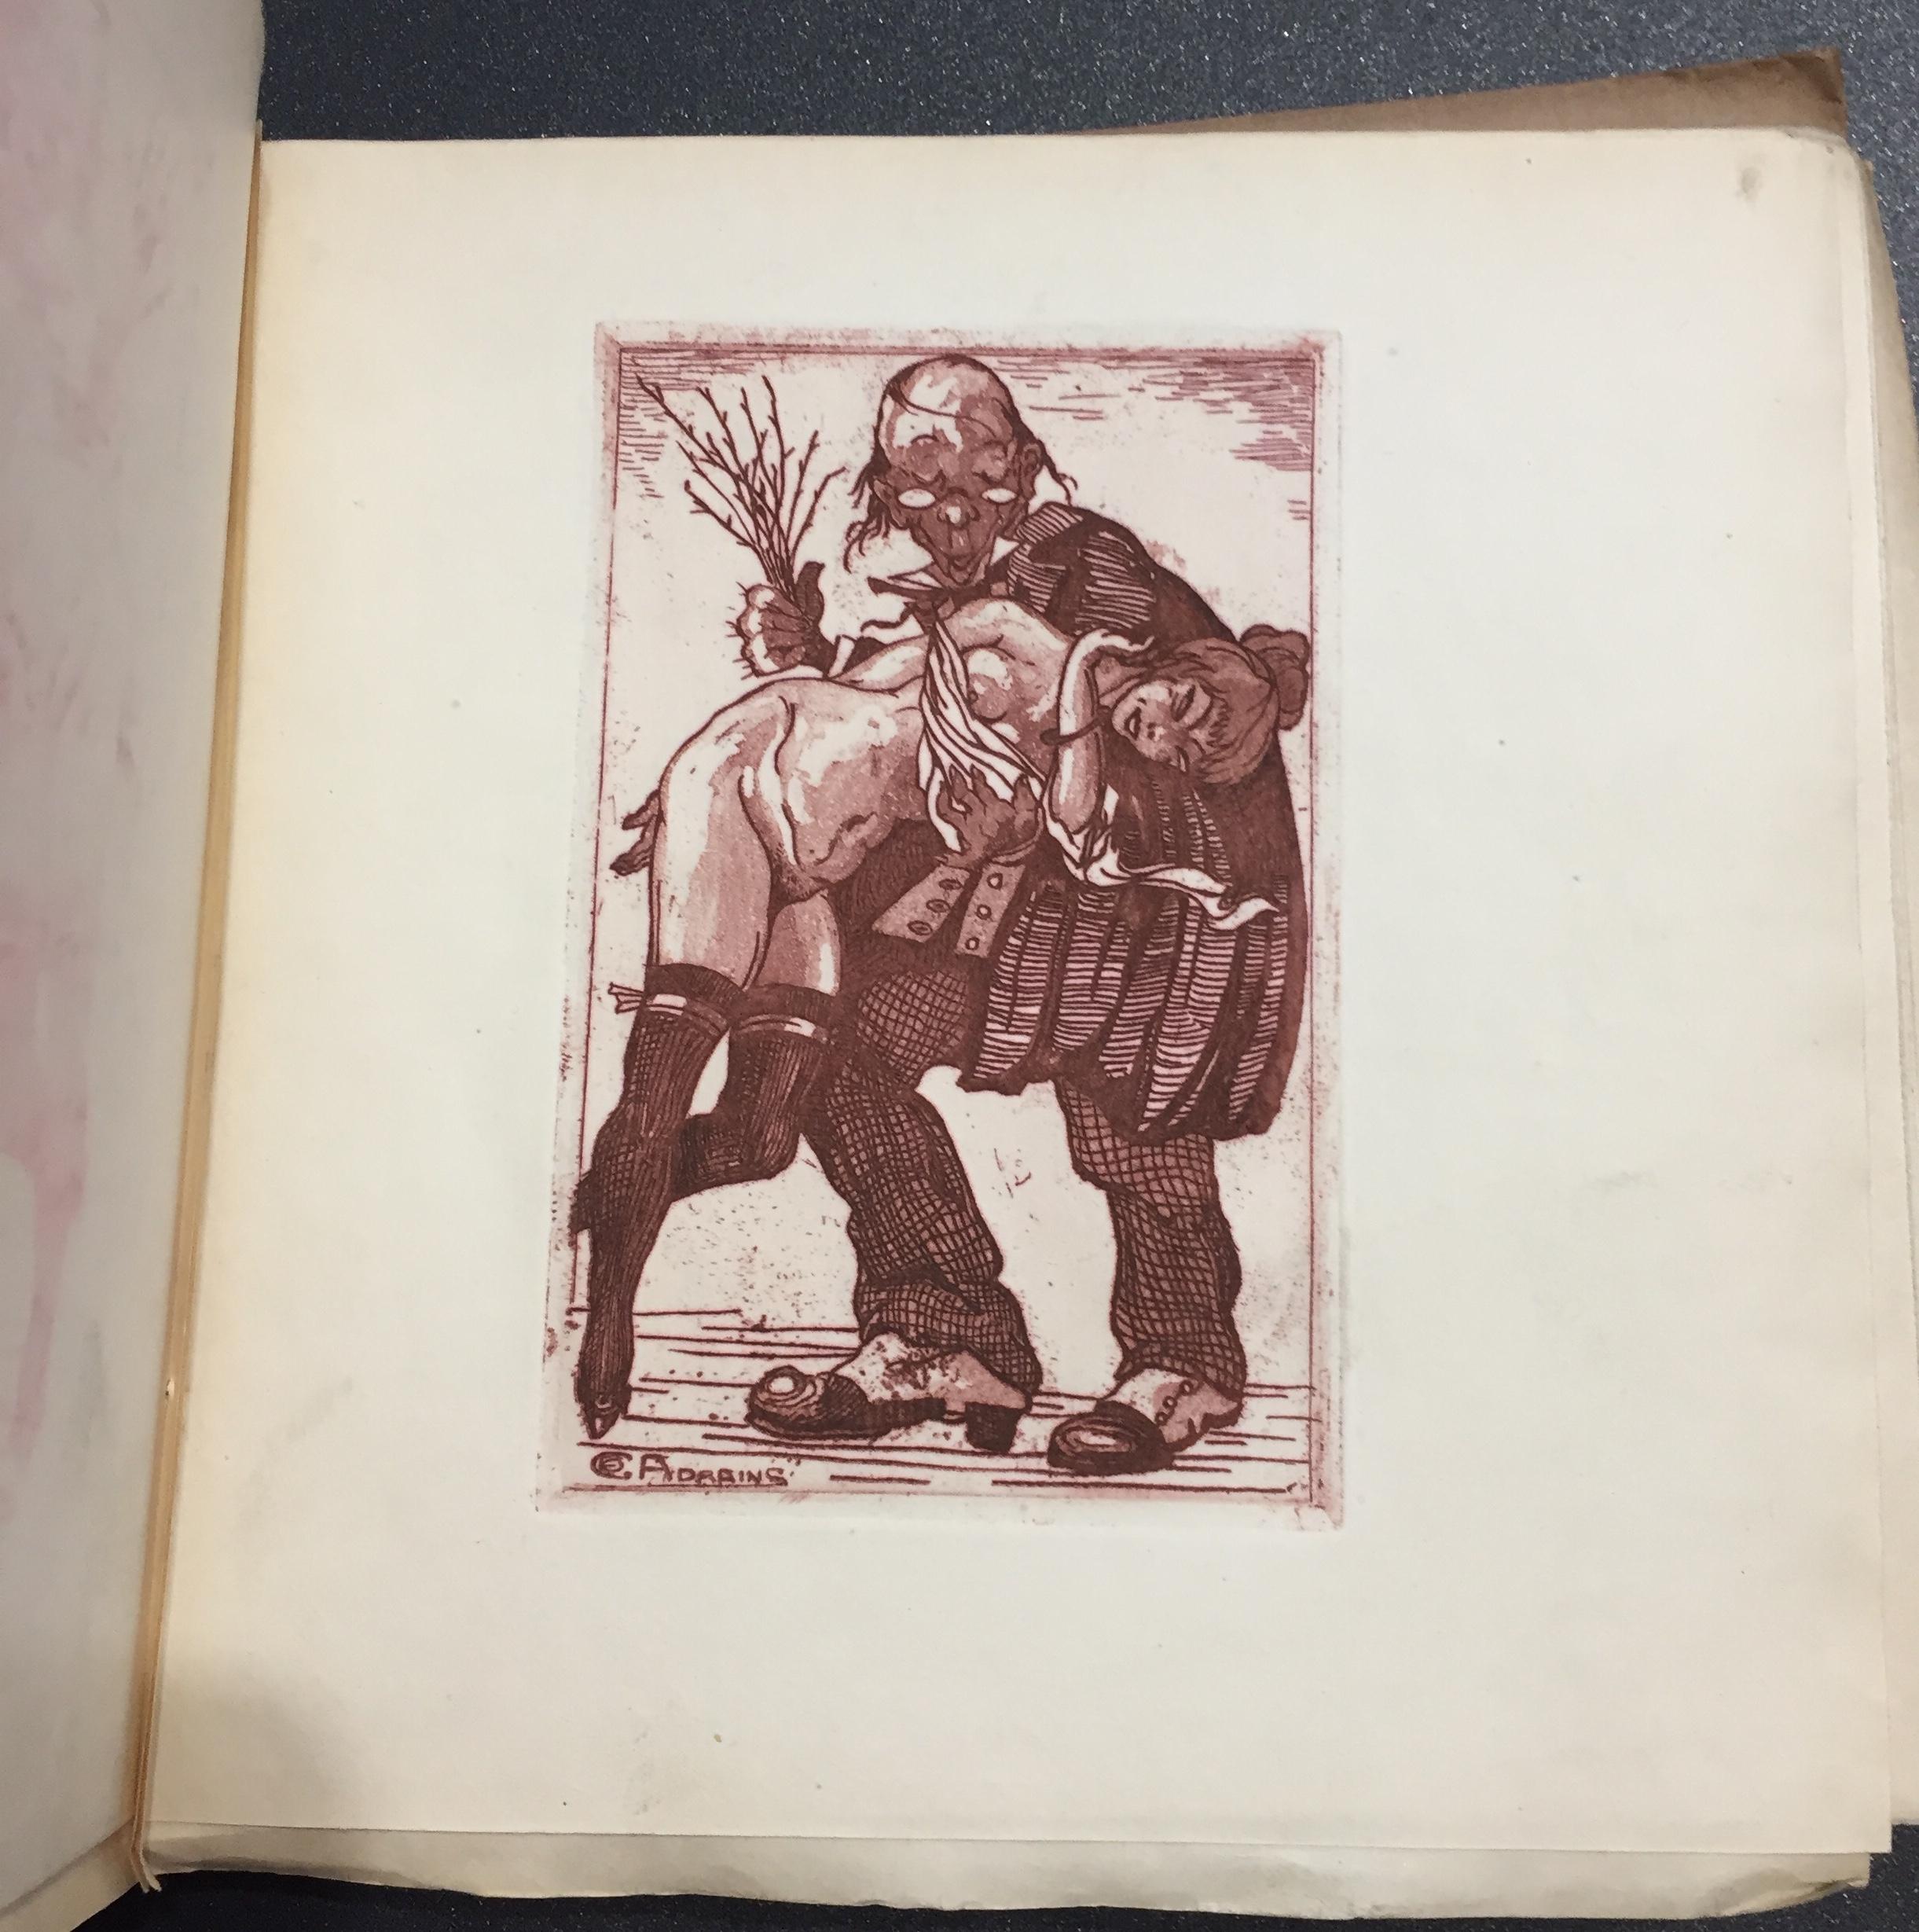 Gestes - Rare Book Illustrated by Alfred Jarry - 1920 For Sale 5